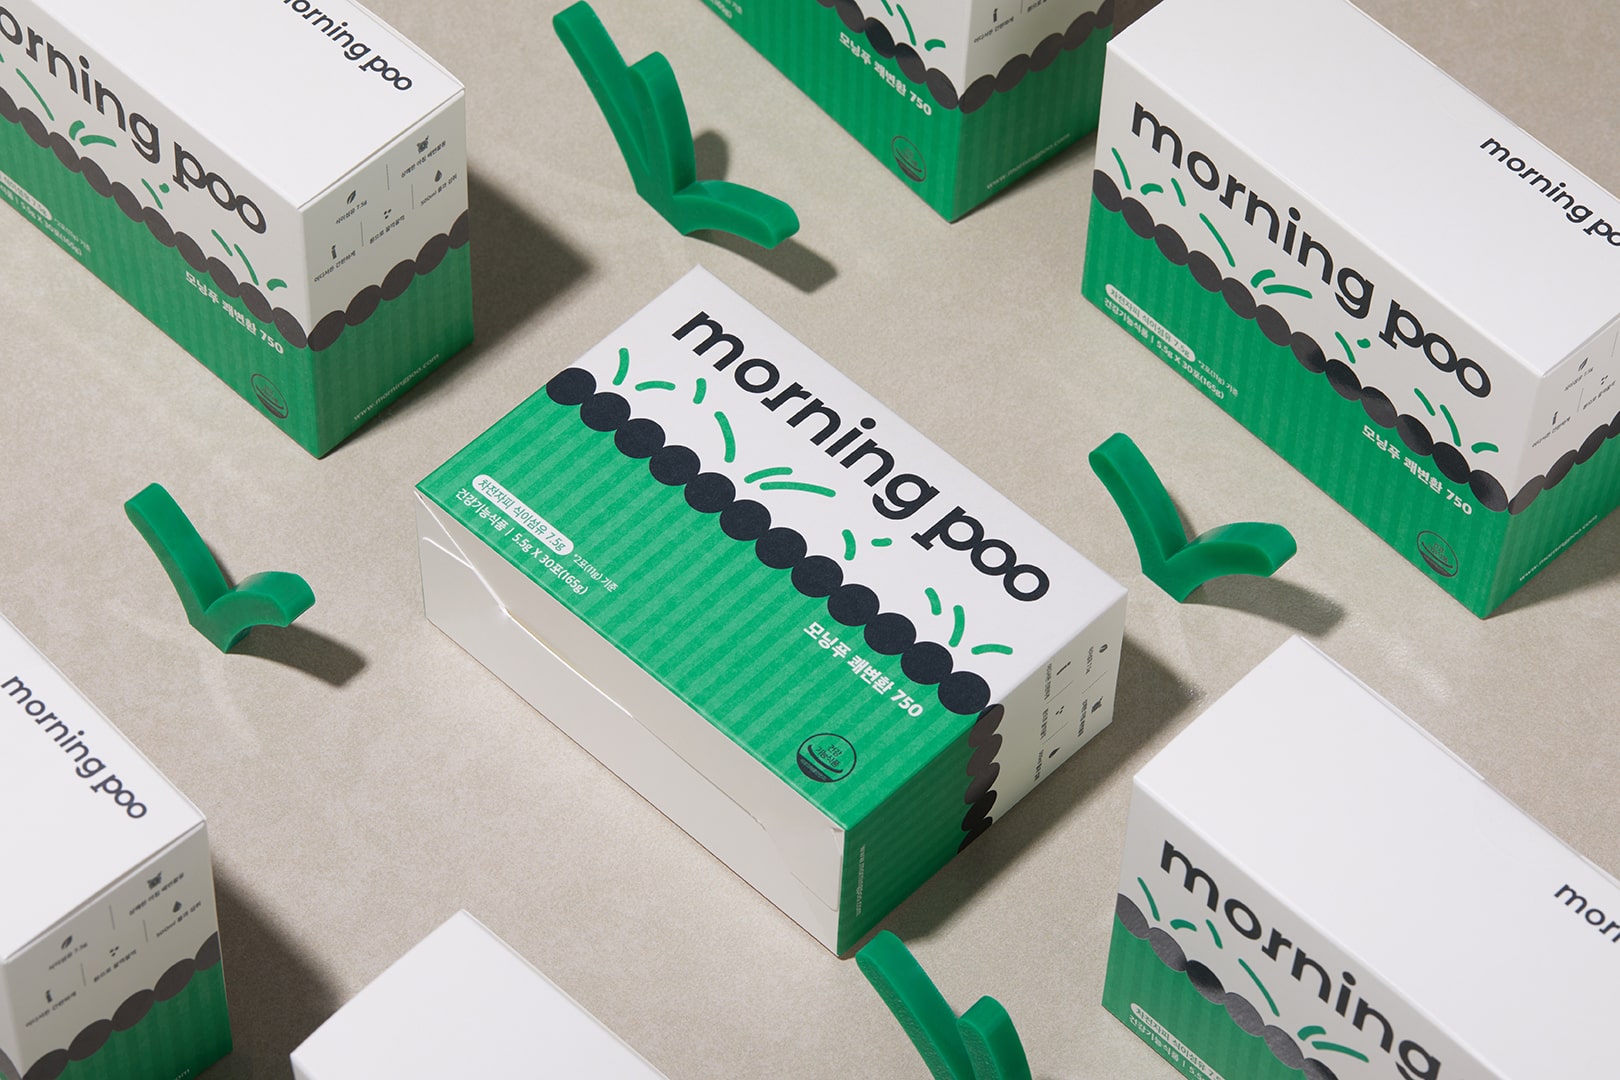 Branding and Packaging Design for Morning Poo by Long&Short